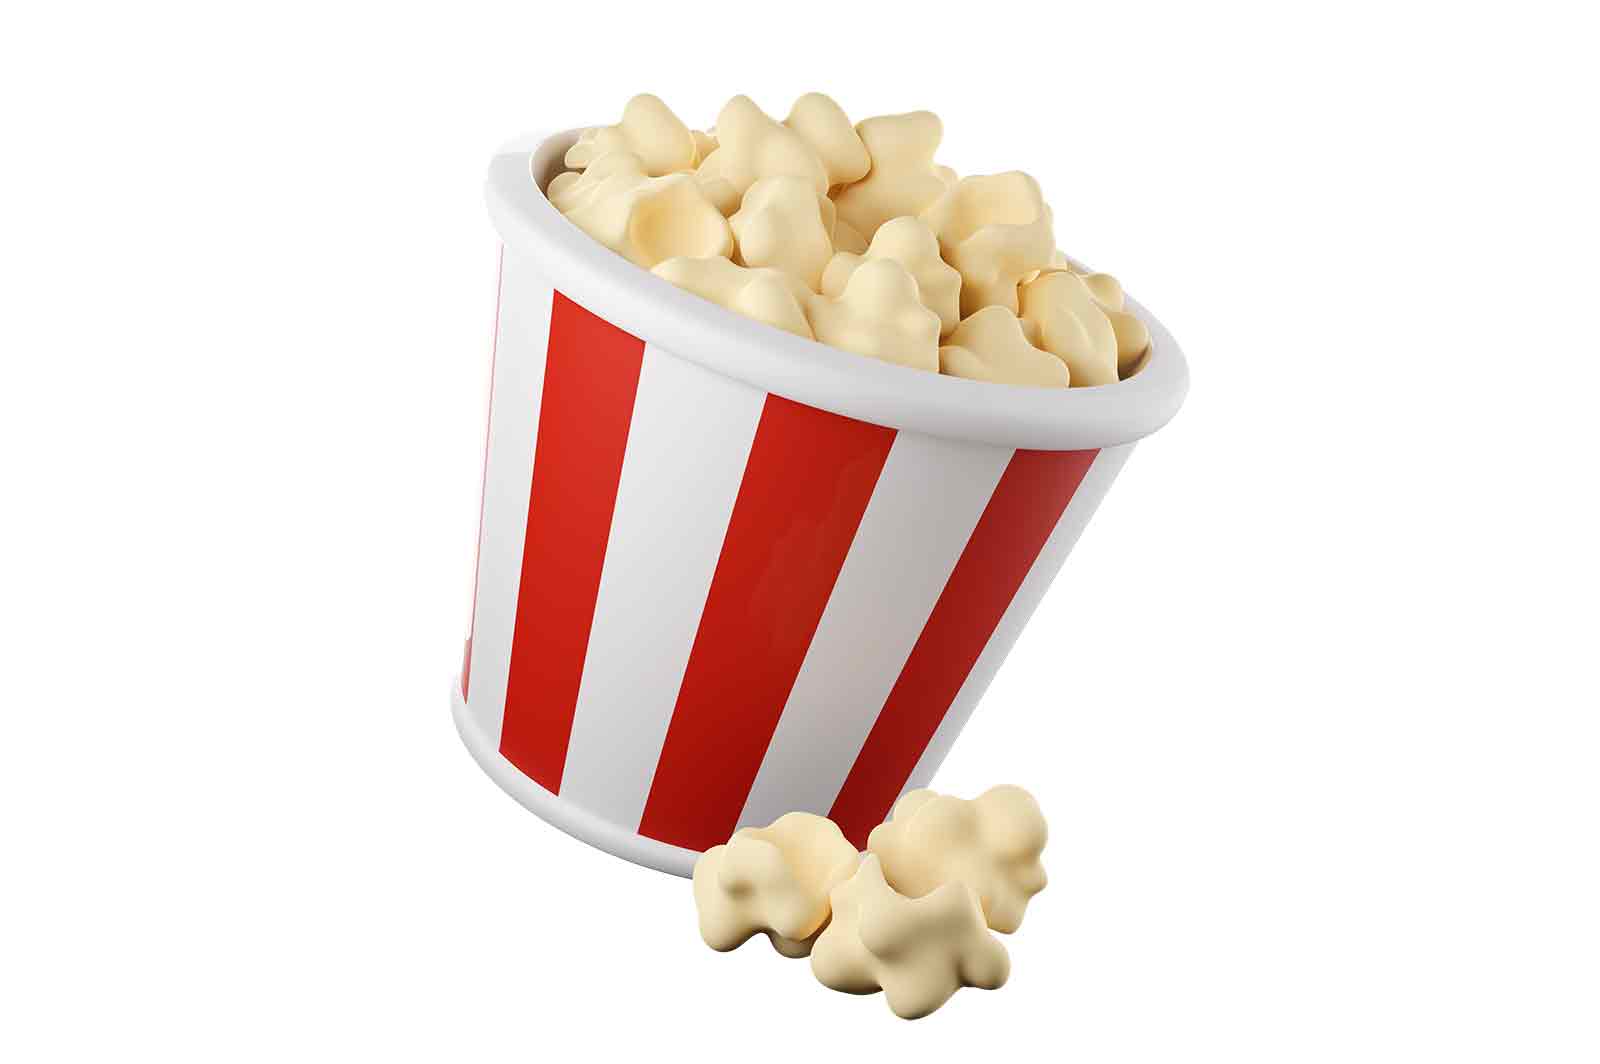 Popcorn in paper striped bucket 3d rendered illustration. Corn snacks paper cup. Watching tv or cinema fast food concept